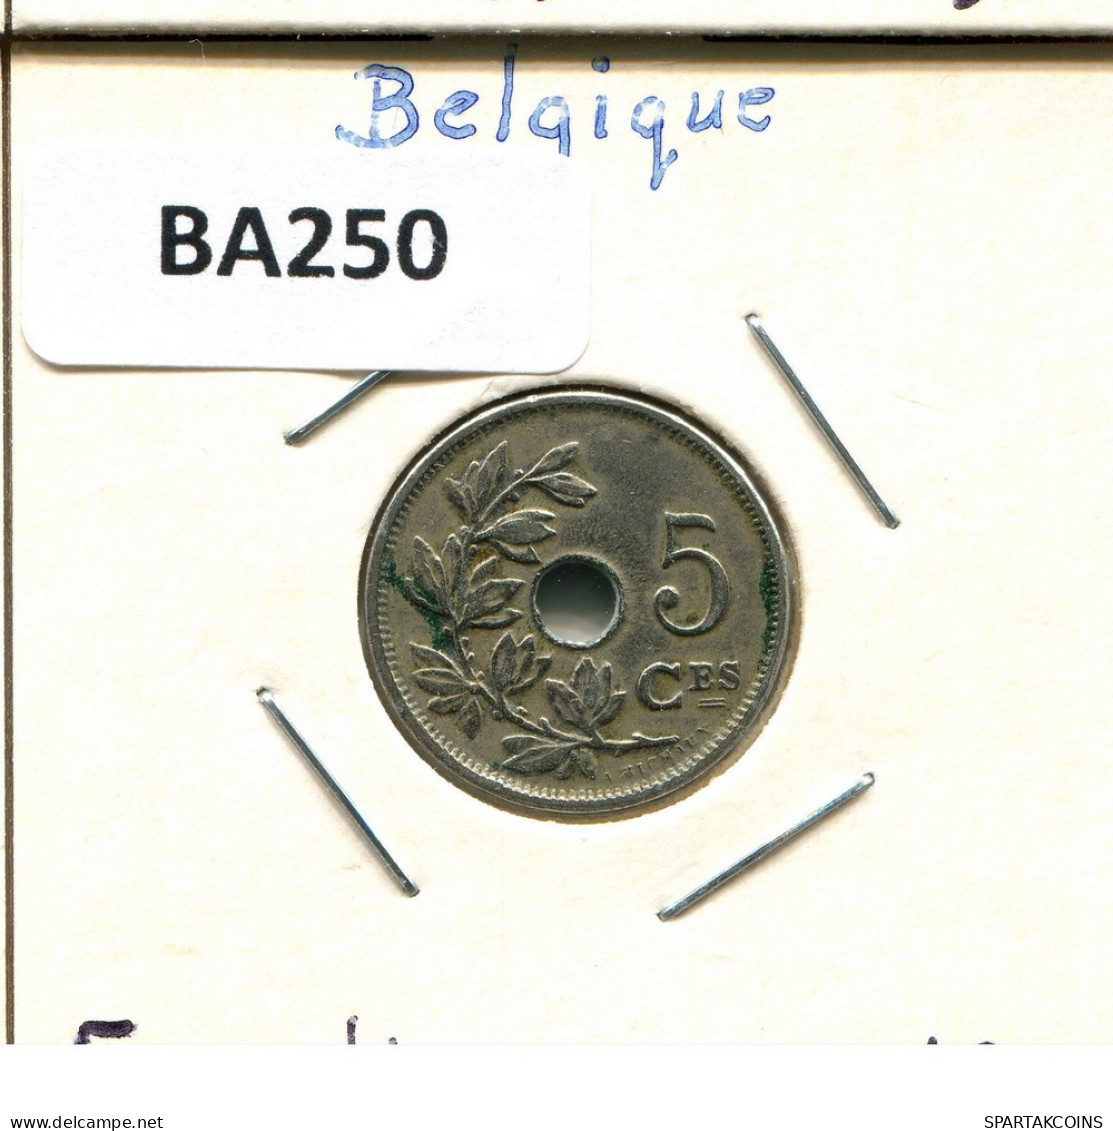 5 CENTIMES 1920 FRENCH Text BELGIUM Coin #BA250.U - 5 Cent